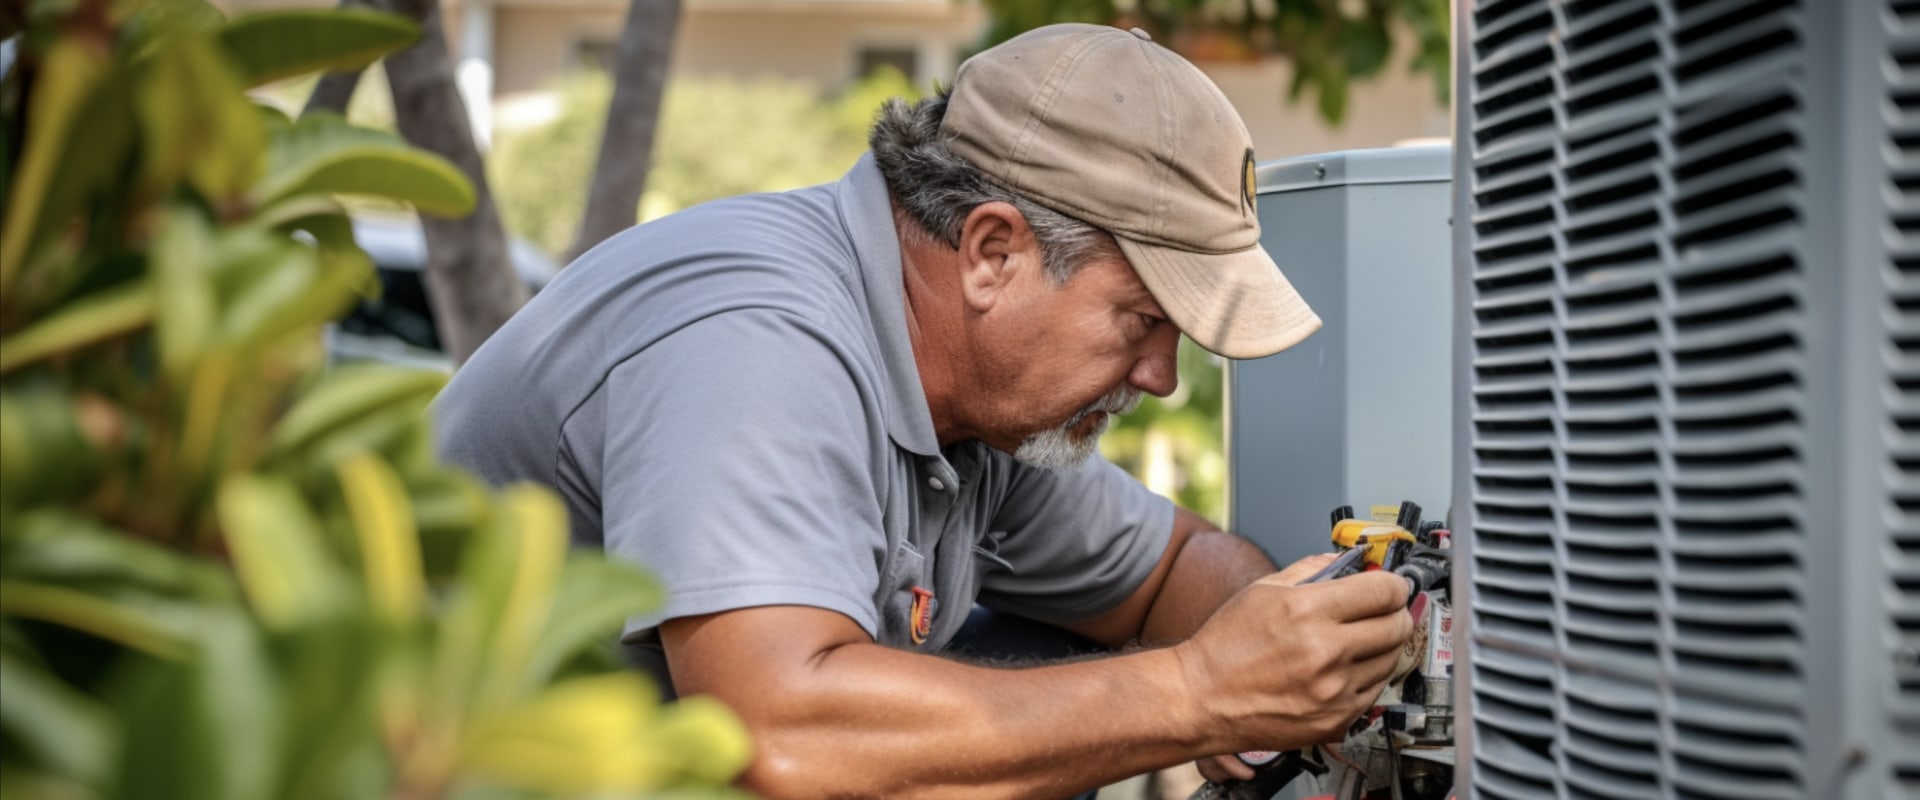 7 Facts On AC Installation Services in Southwest Ranches FL